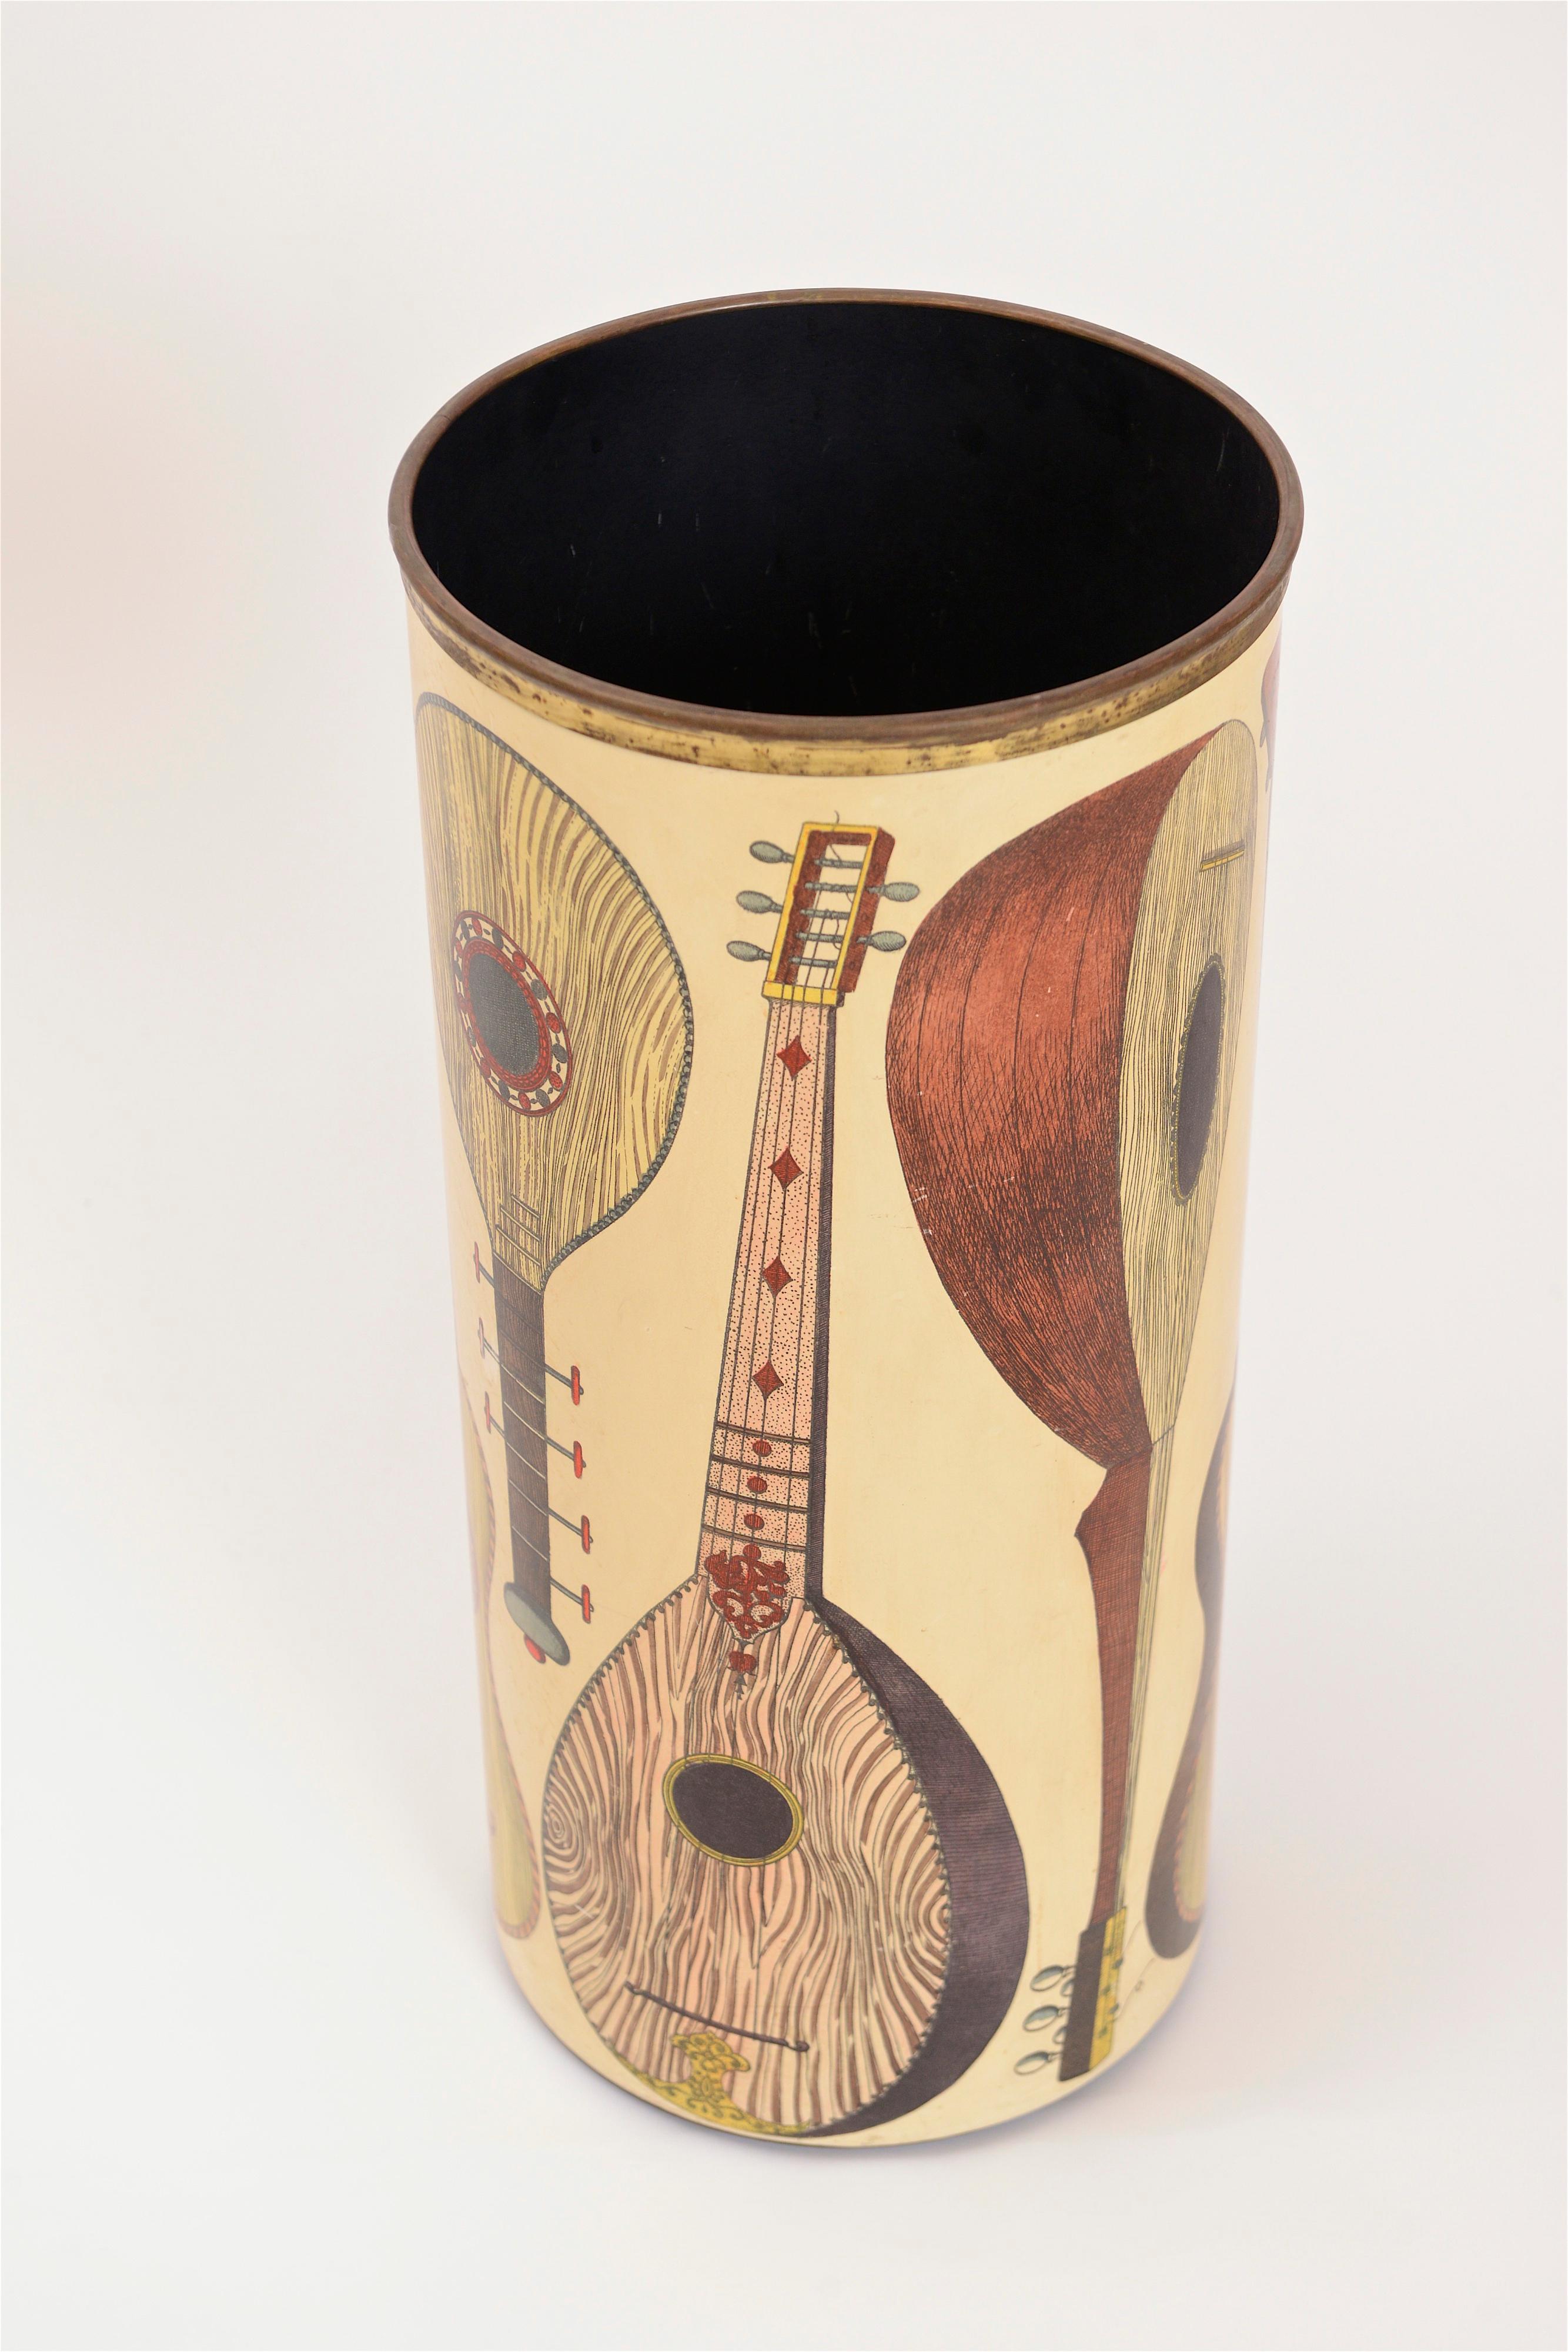 A beautiful umbrella stand from the 1950s by Piero Fornasetti. This ‘instrumenti’ model is decorated with eight lithographic transfers of different stringed instruments. In great condition, this umbrella stand is signed on the underside